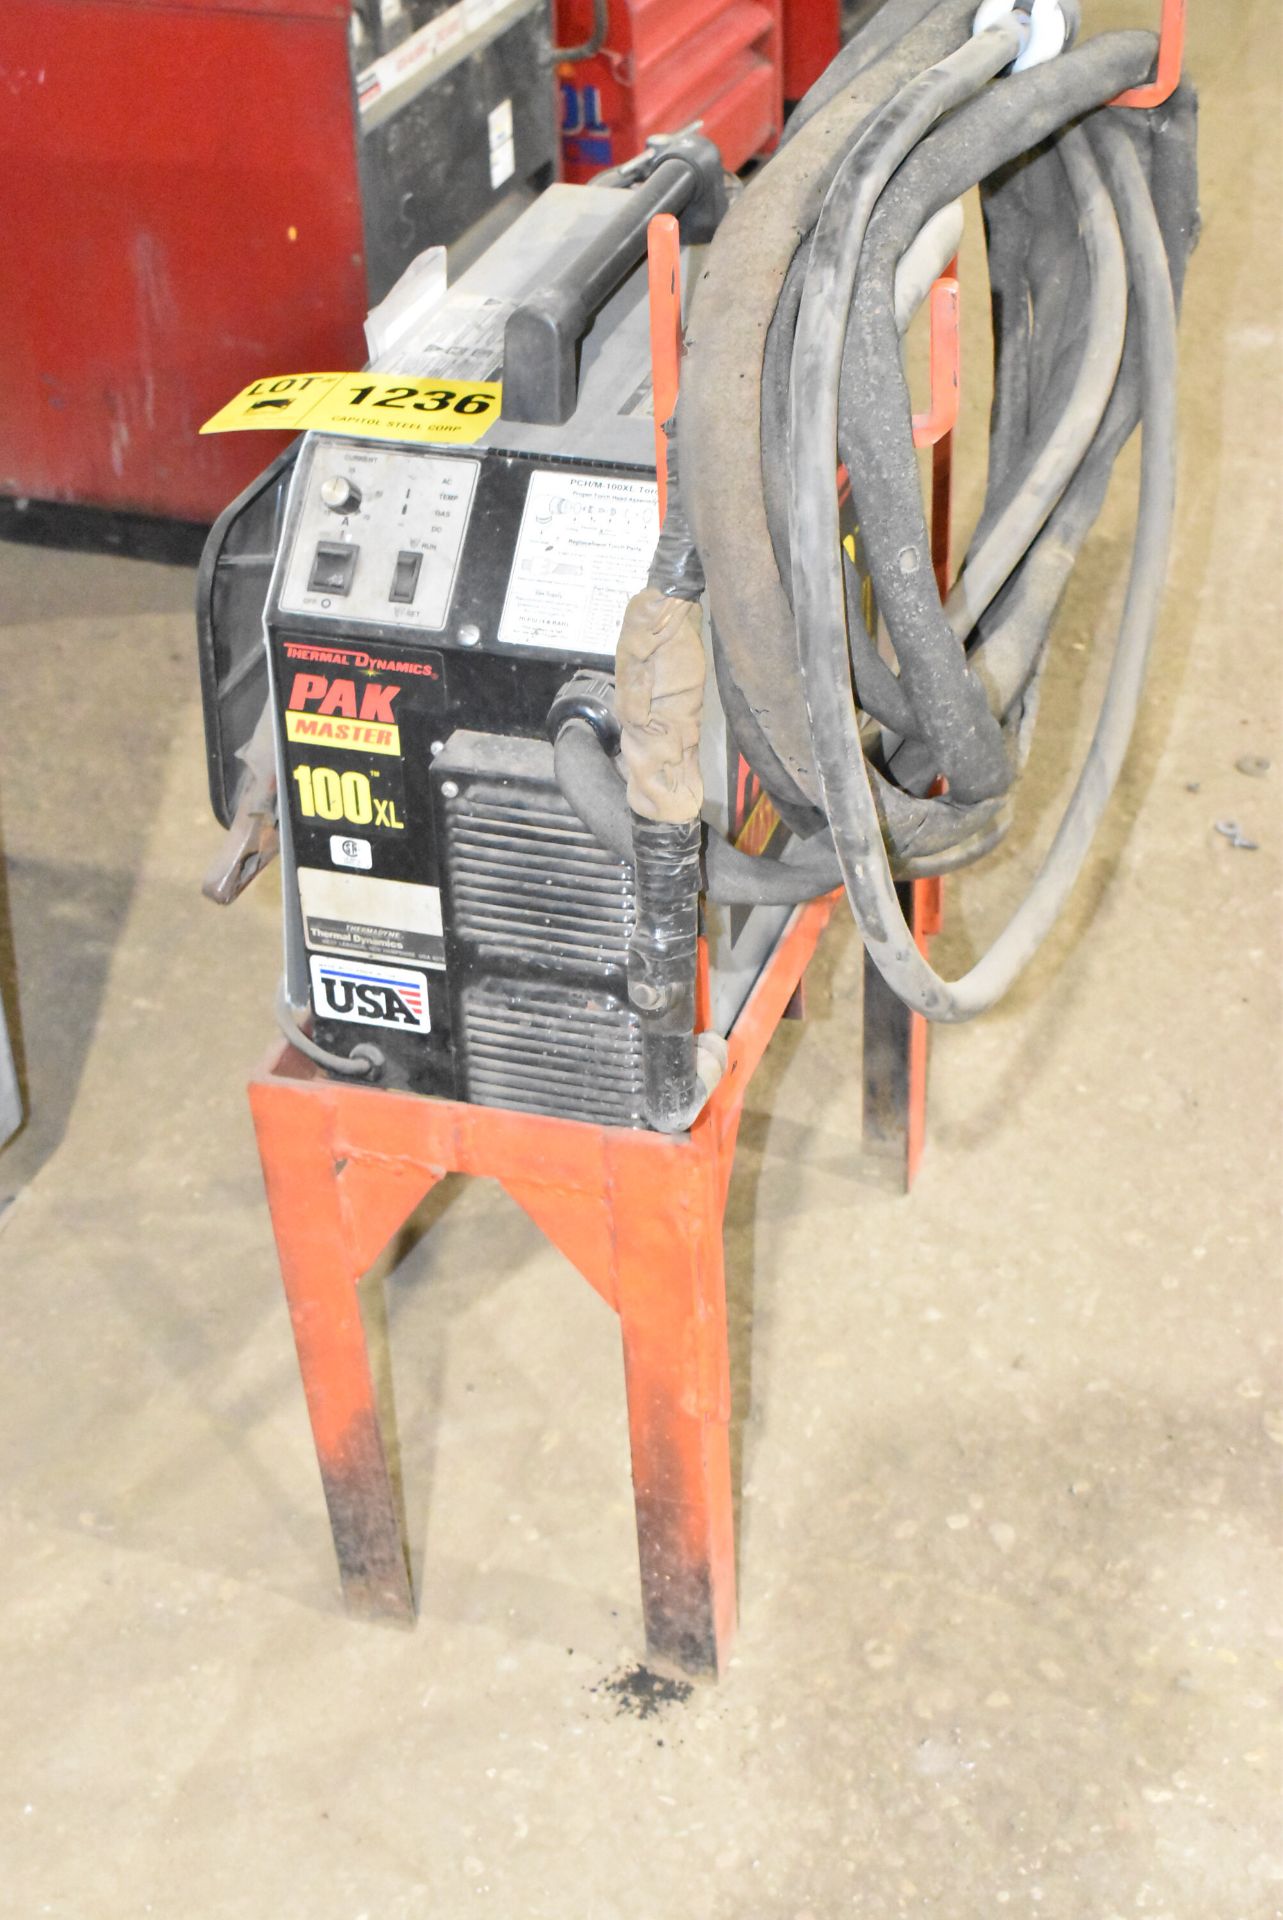 THERMAL DYNAMICS PAK MASTER 100XL PORTABLE PLASMA CUTTER WITH CABLES & GUN, S/N: N/A [RIGGING FEES - Image 2 of 8